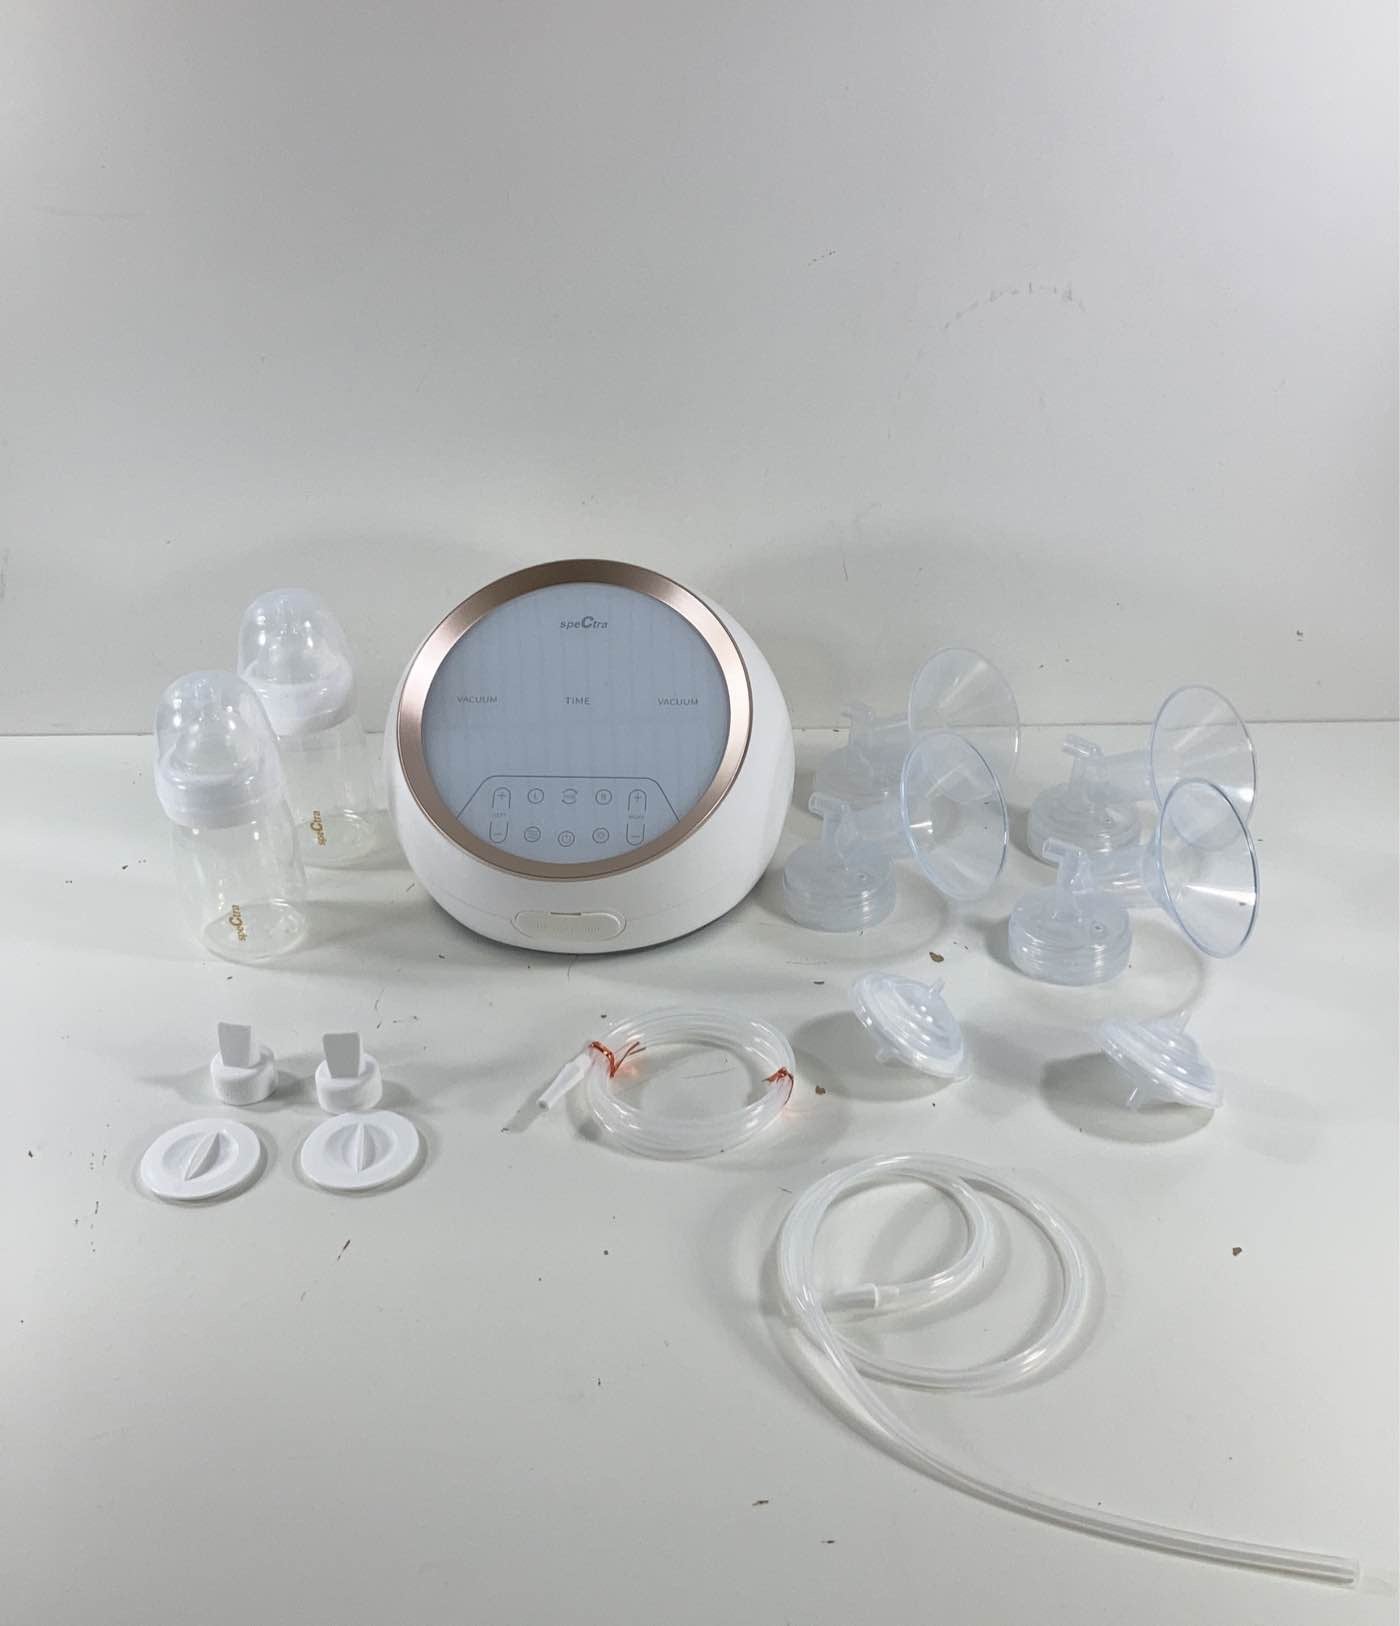 Spectra Baby Synergy Gold Electric Breast Pump